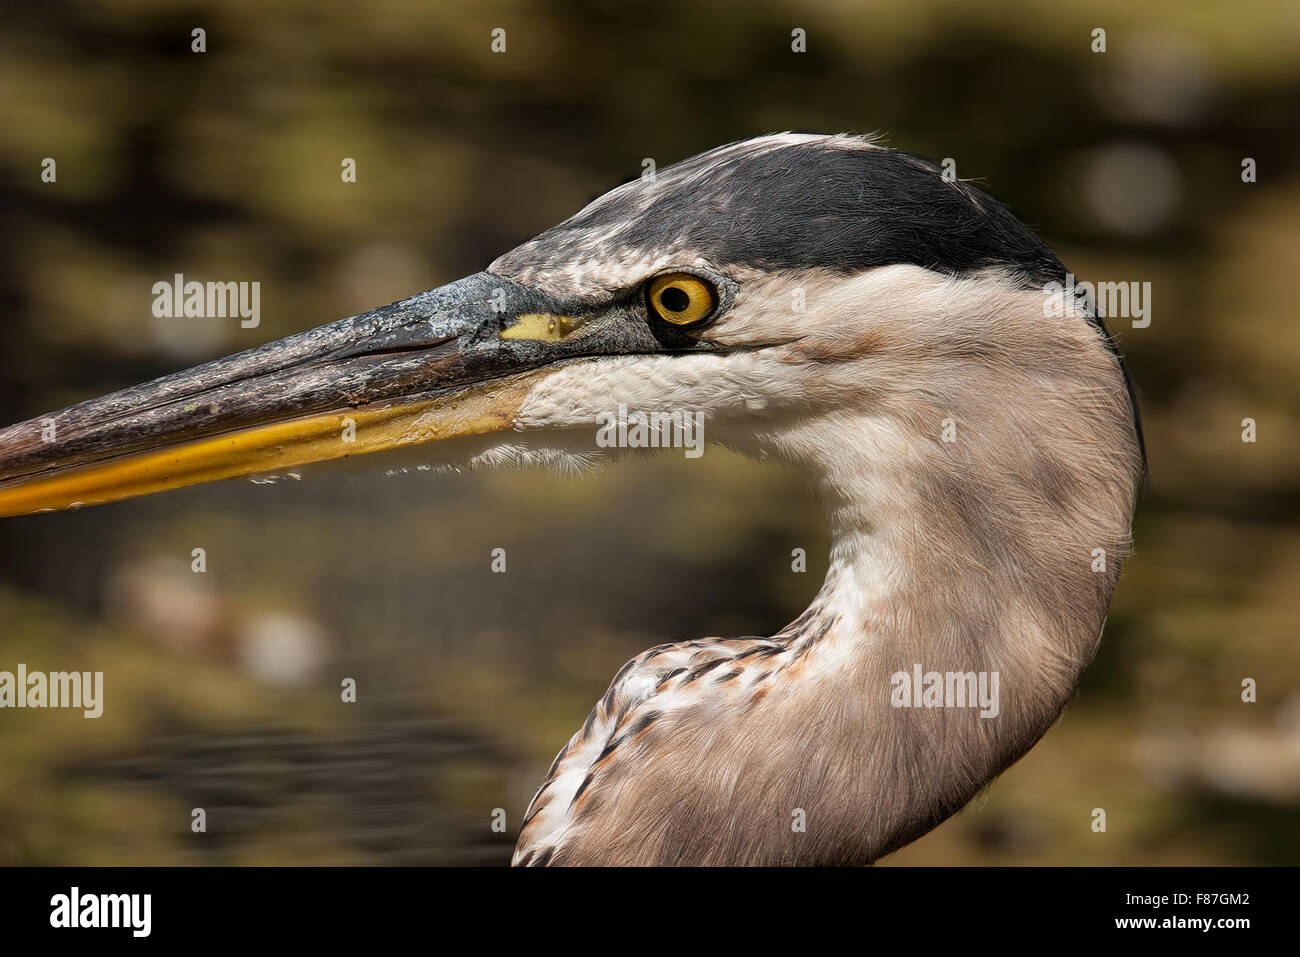 Close-up of Great Blue Heron in a South Carolina pool of water Stock Photo